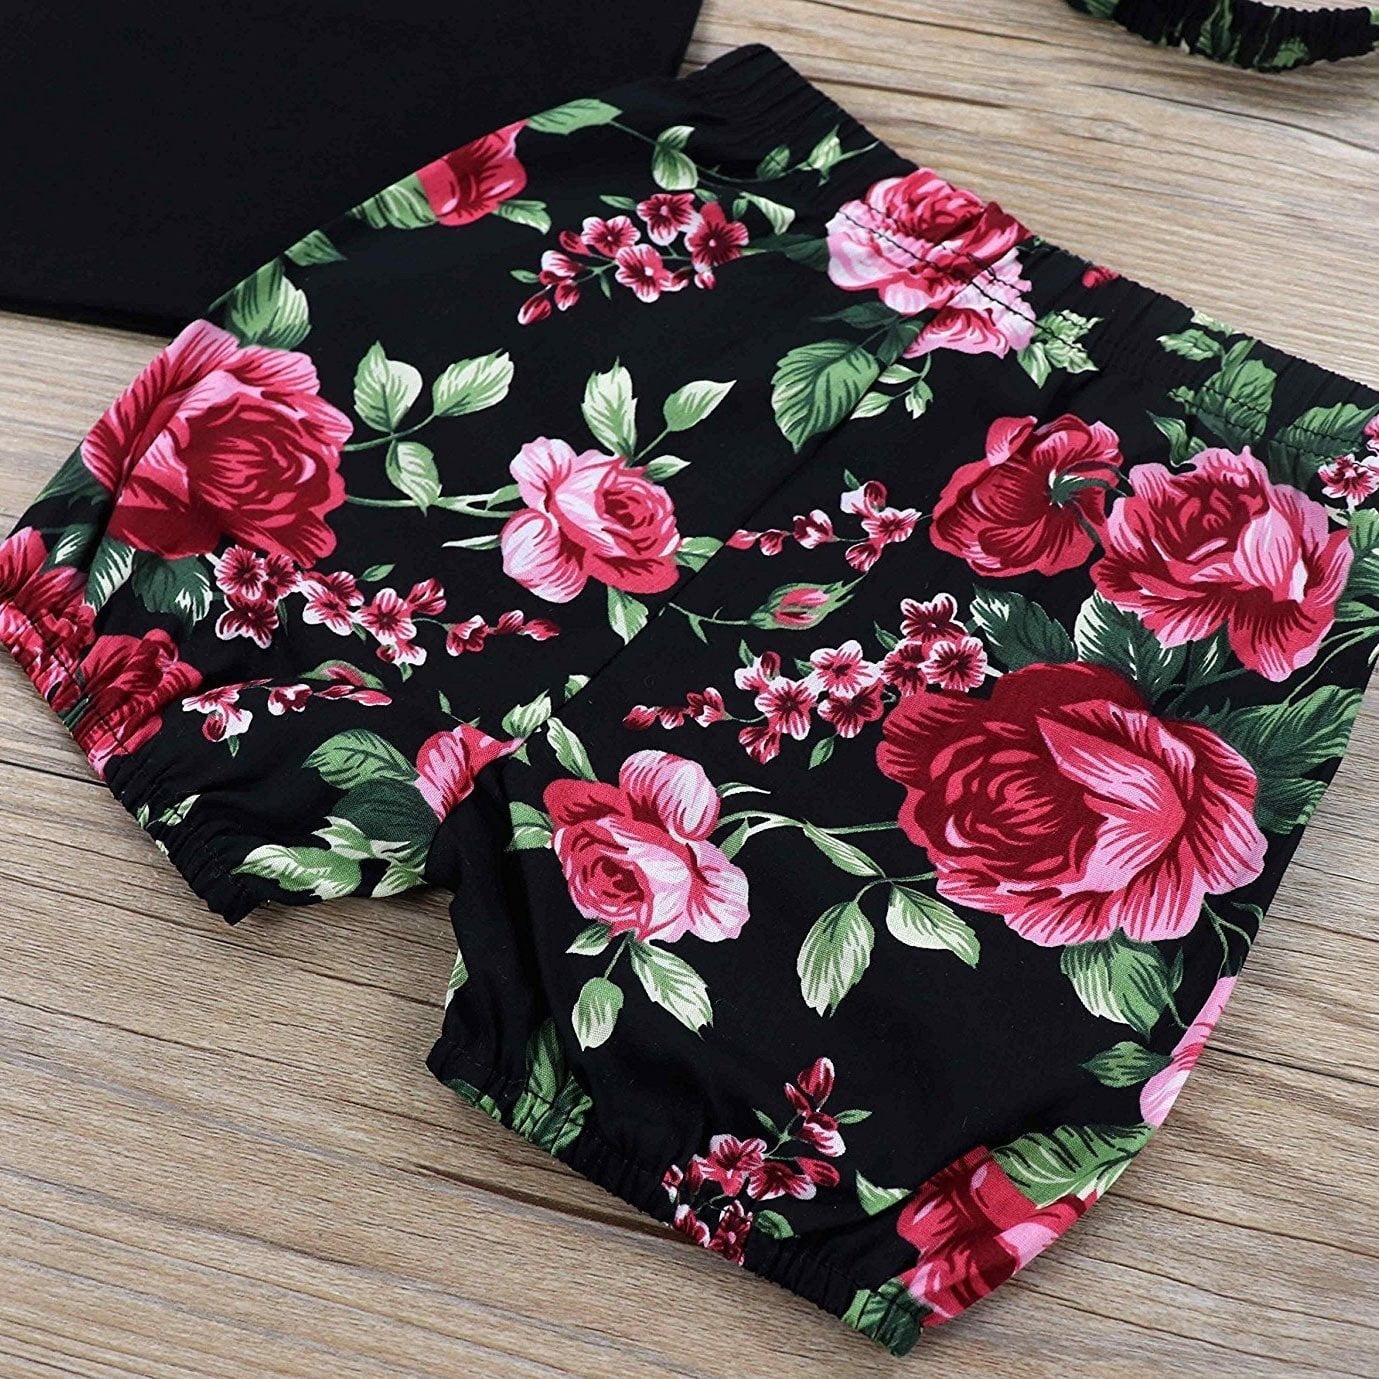 Baby Girl Clothes Wild One Vest and Floral Pants Outfits with Bowknot Headband